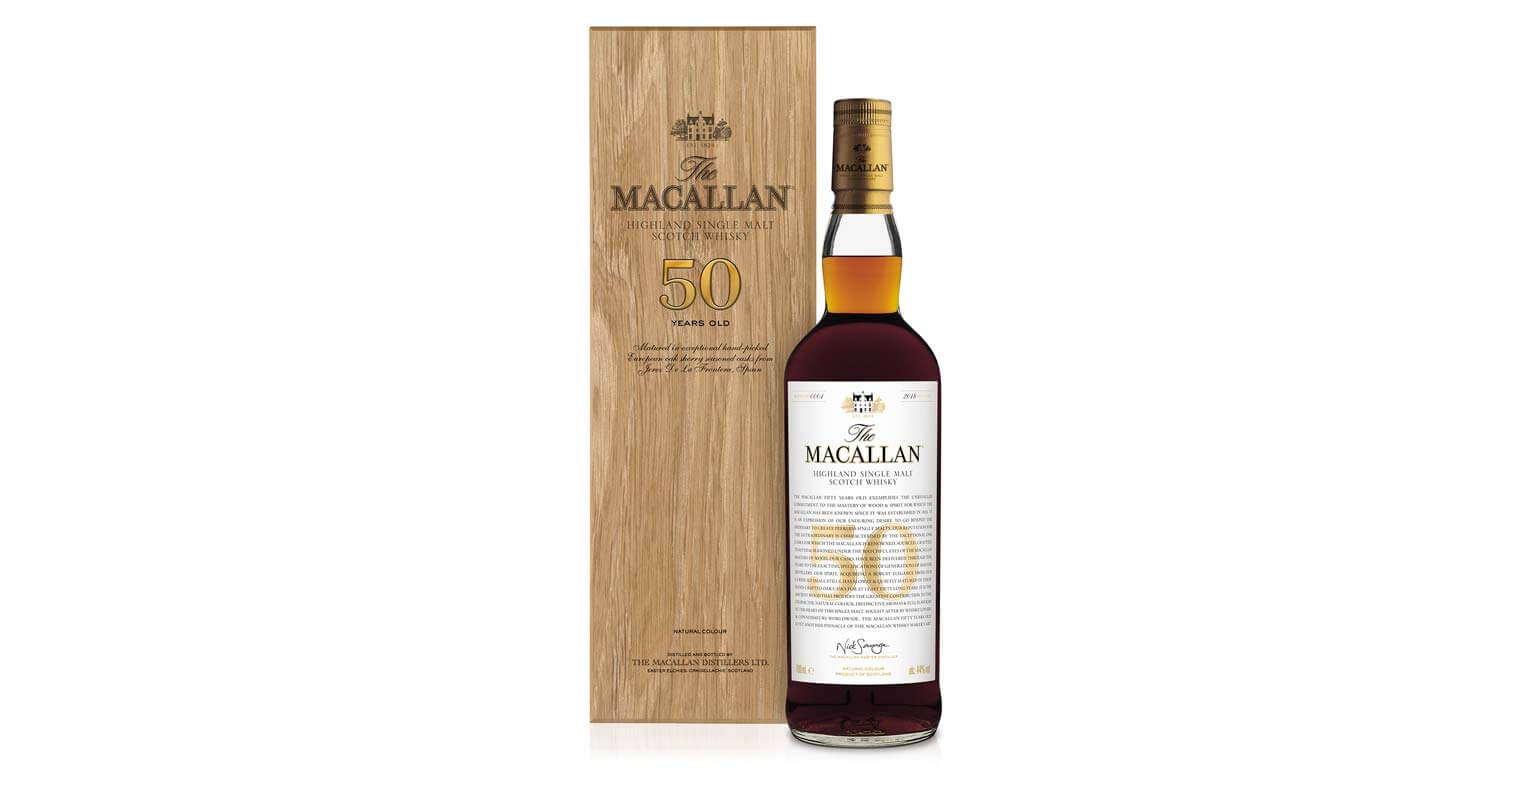 The Macallan 50 Years Old, bottle and package on white, featured image